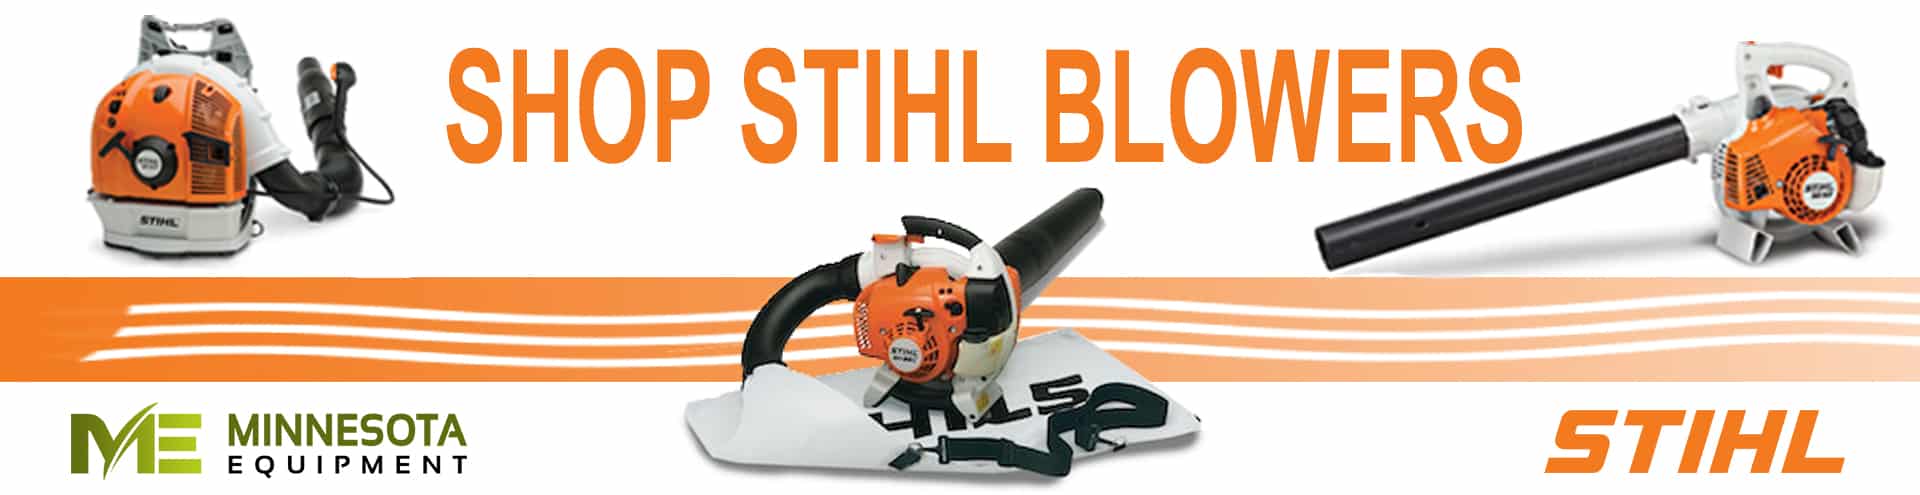 A website banner features Stihl Blowers available for purchase at Minnesota Equipment and the text, "SHOP STIHL BLOWERS."